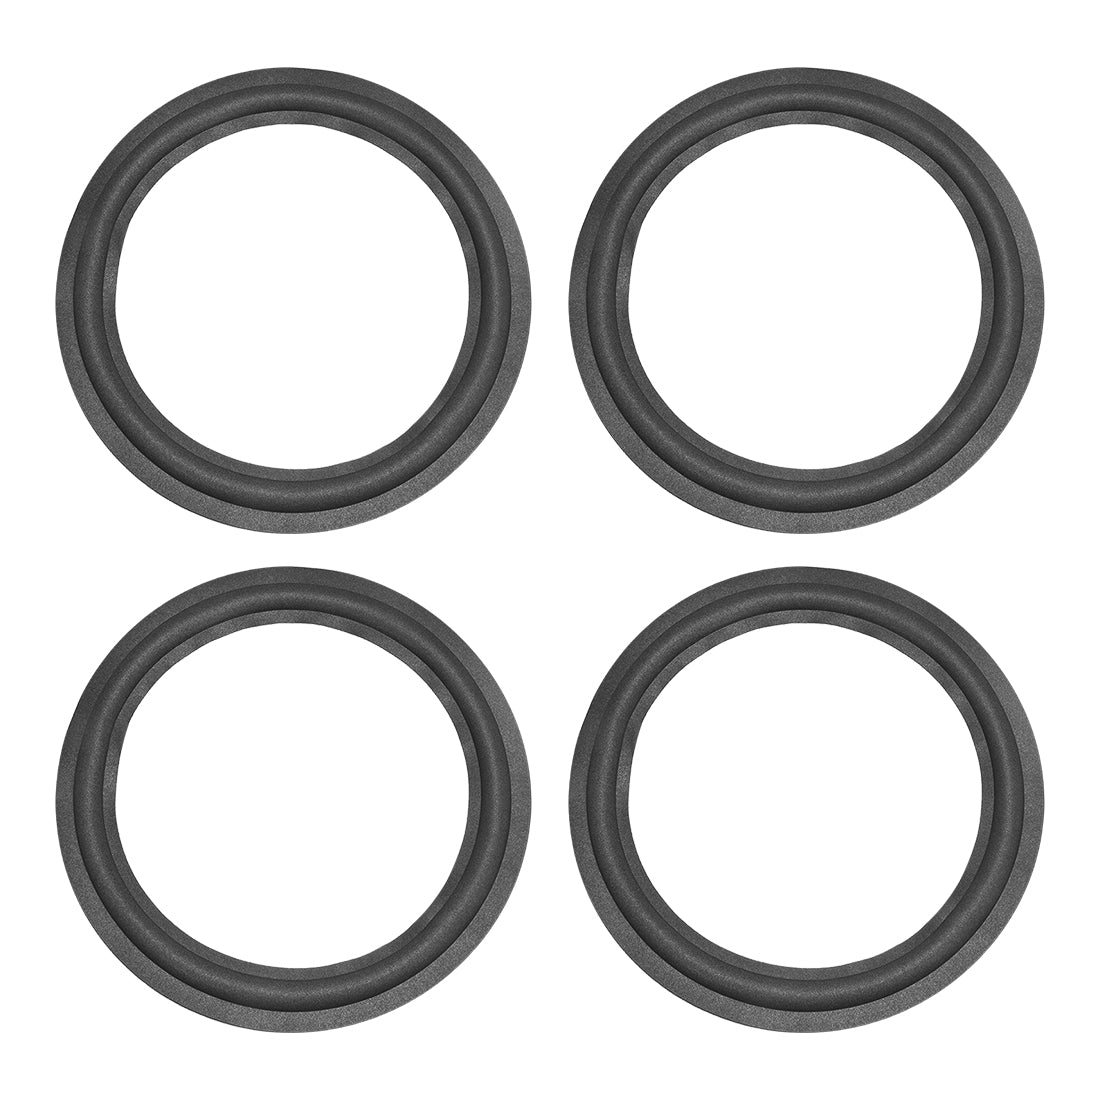 uxcell Uxcell 12 inch Foam Speaker Edge Surround Ring Replacement Parts for Speaker Repair or DIY 4pcs